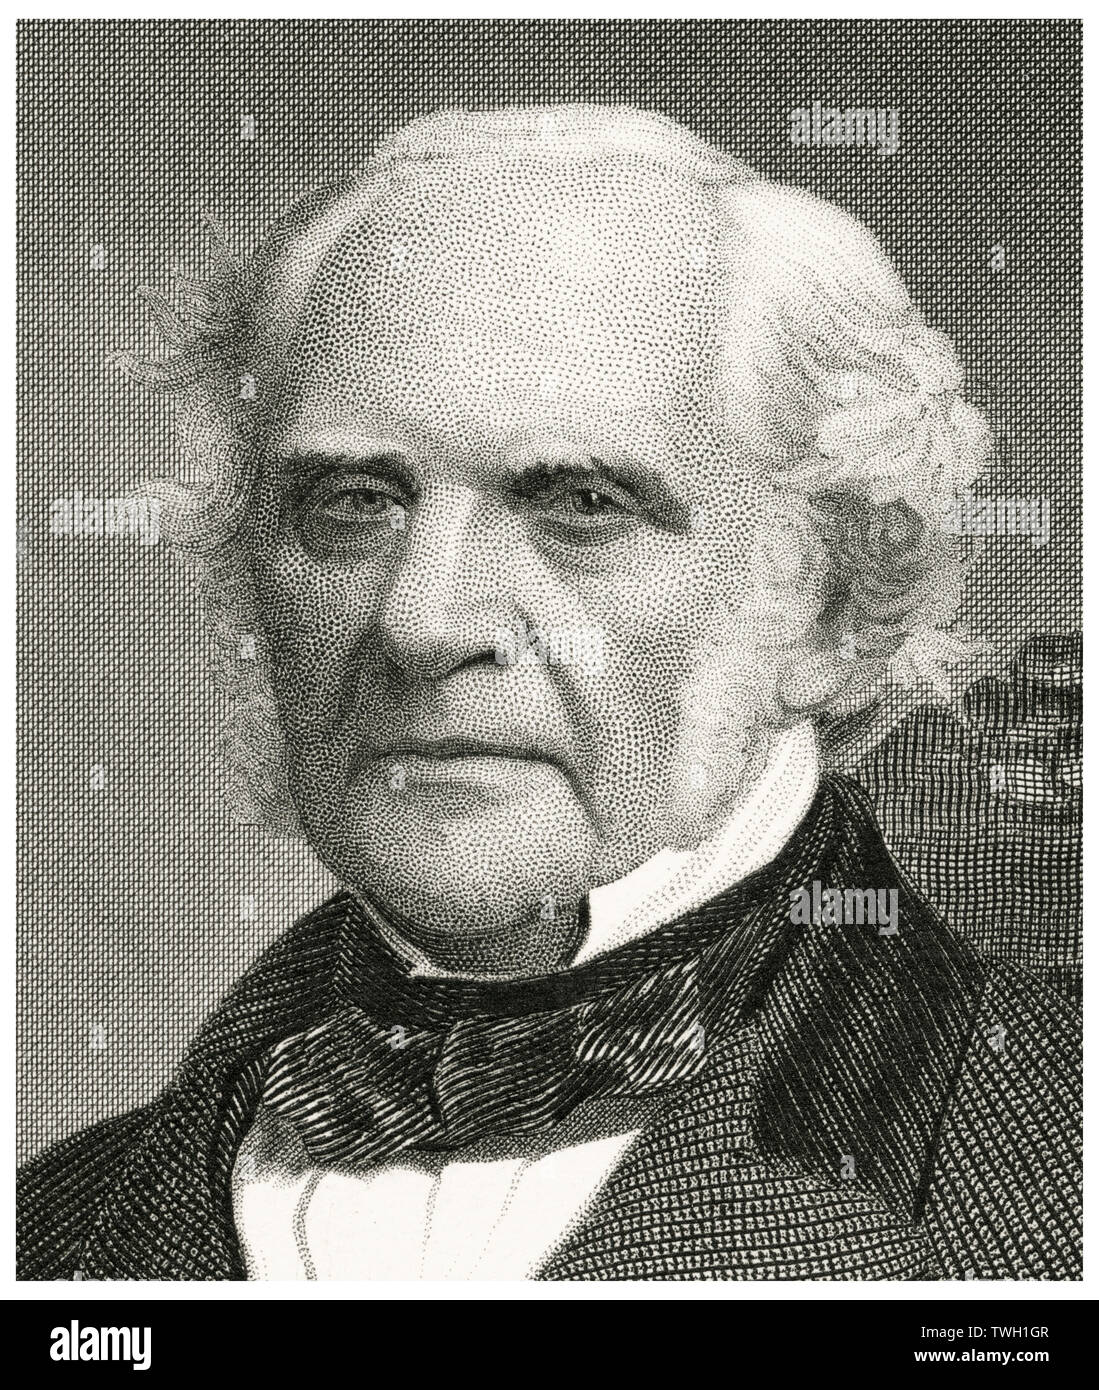 George Peabody (1795-1869), American Financier and Philanthropist, Head and Shoulders Portrait, Steel Engraving, Portrait Gallery of Eminent Men and Women of Europe and America by Evert A. Duyckinck, Published by Henry J. Johnson, Johnson, Wilson & Company, New York, 1873 Stock Photo